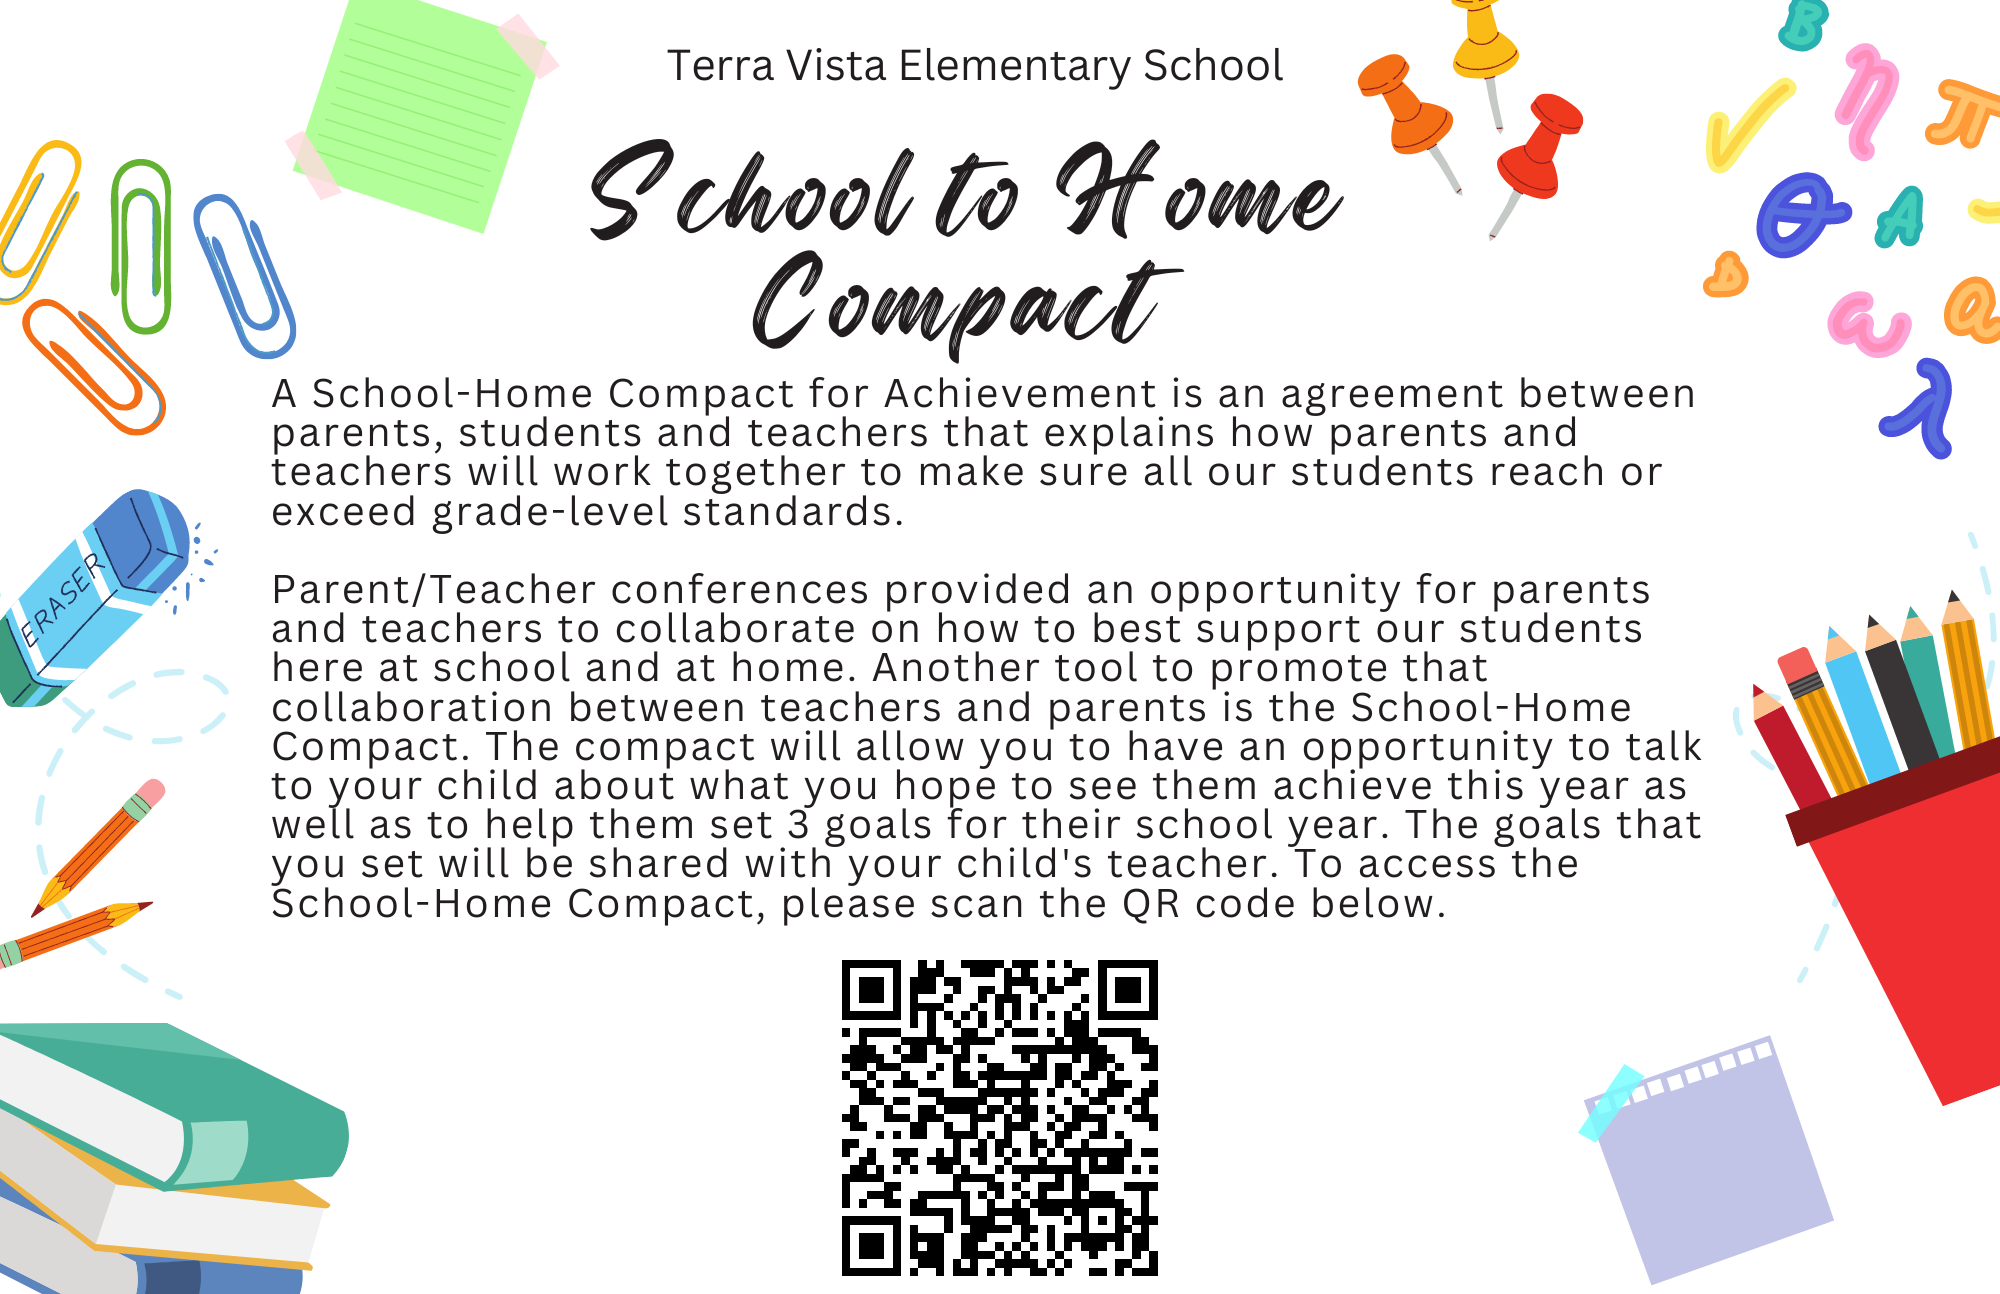 Terra Vista School to Home Compact for Achievement with QR Code